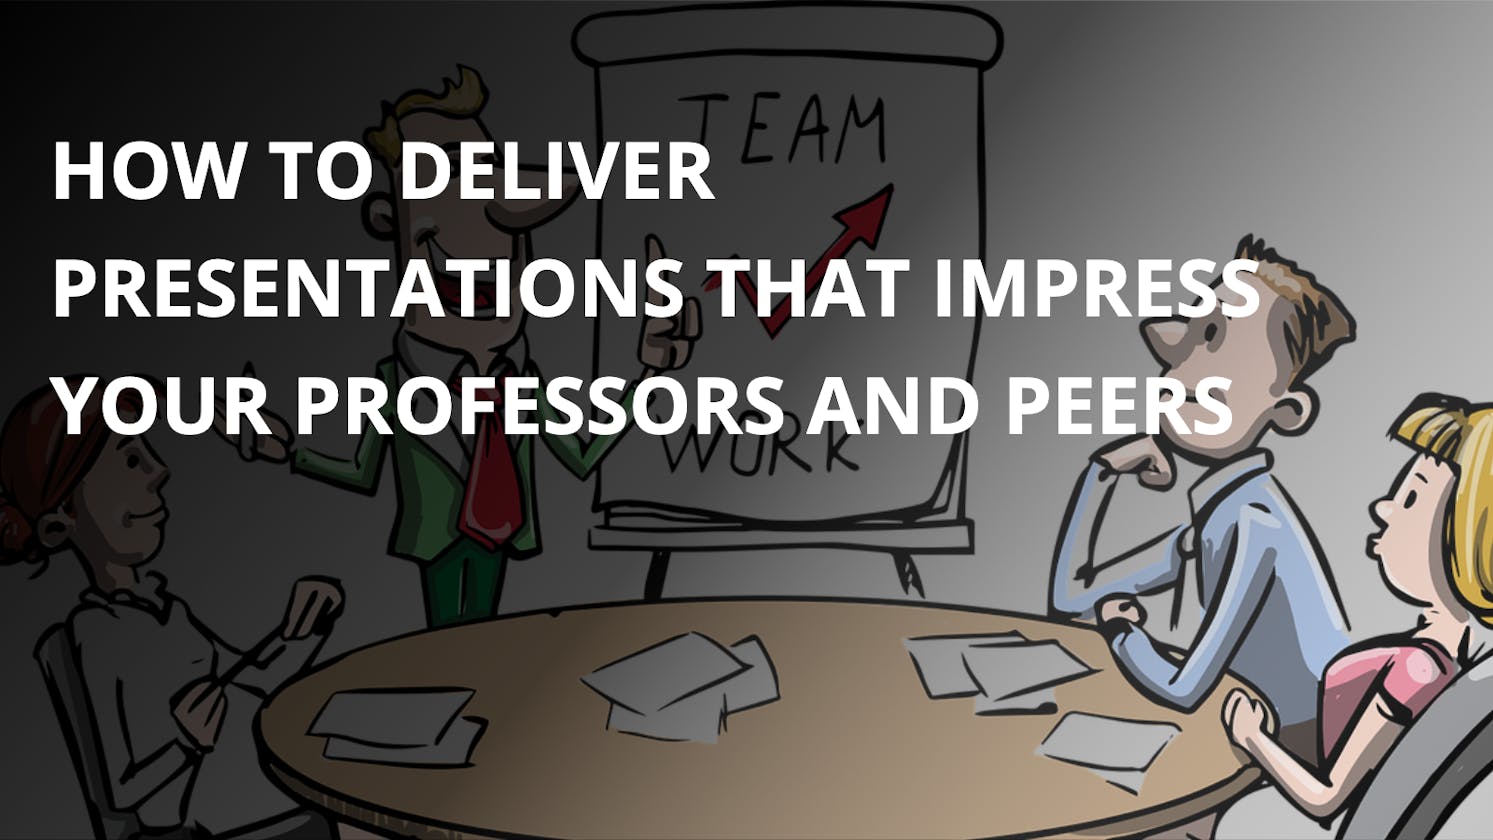 How to Deliver Presentations that Impress Your Professors and Peers